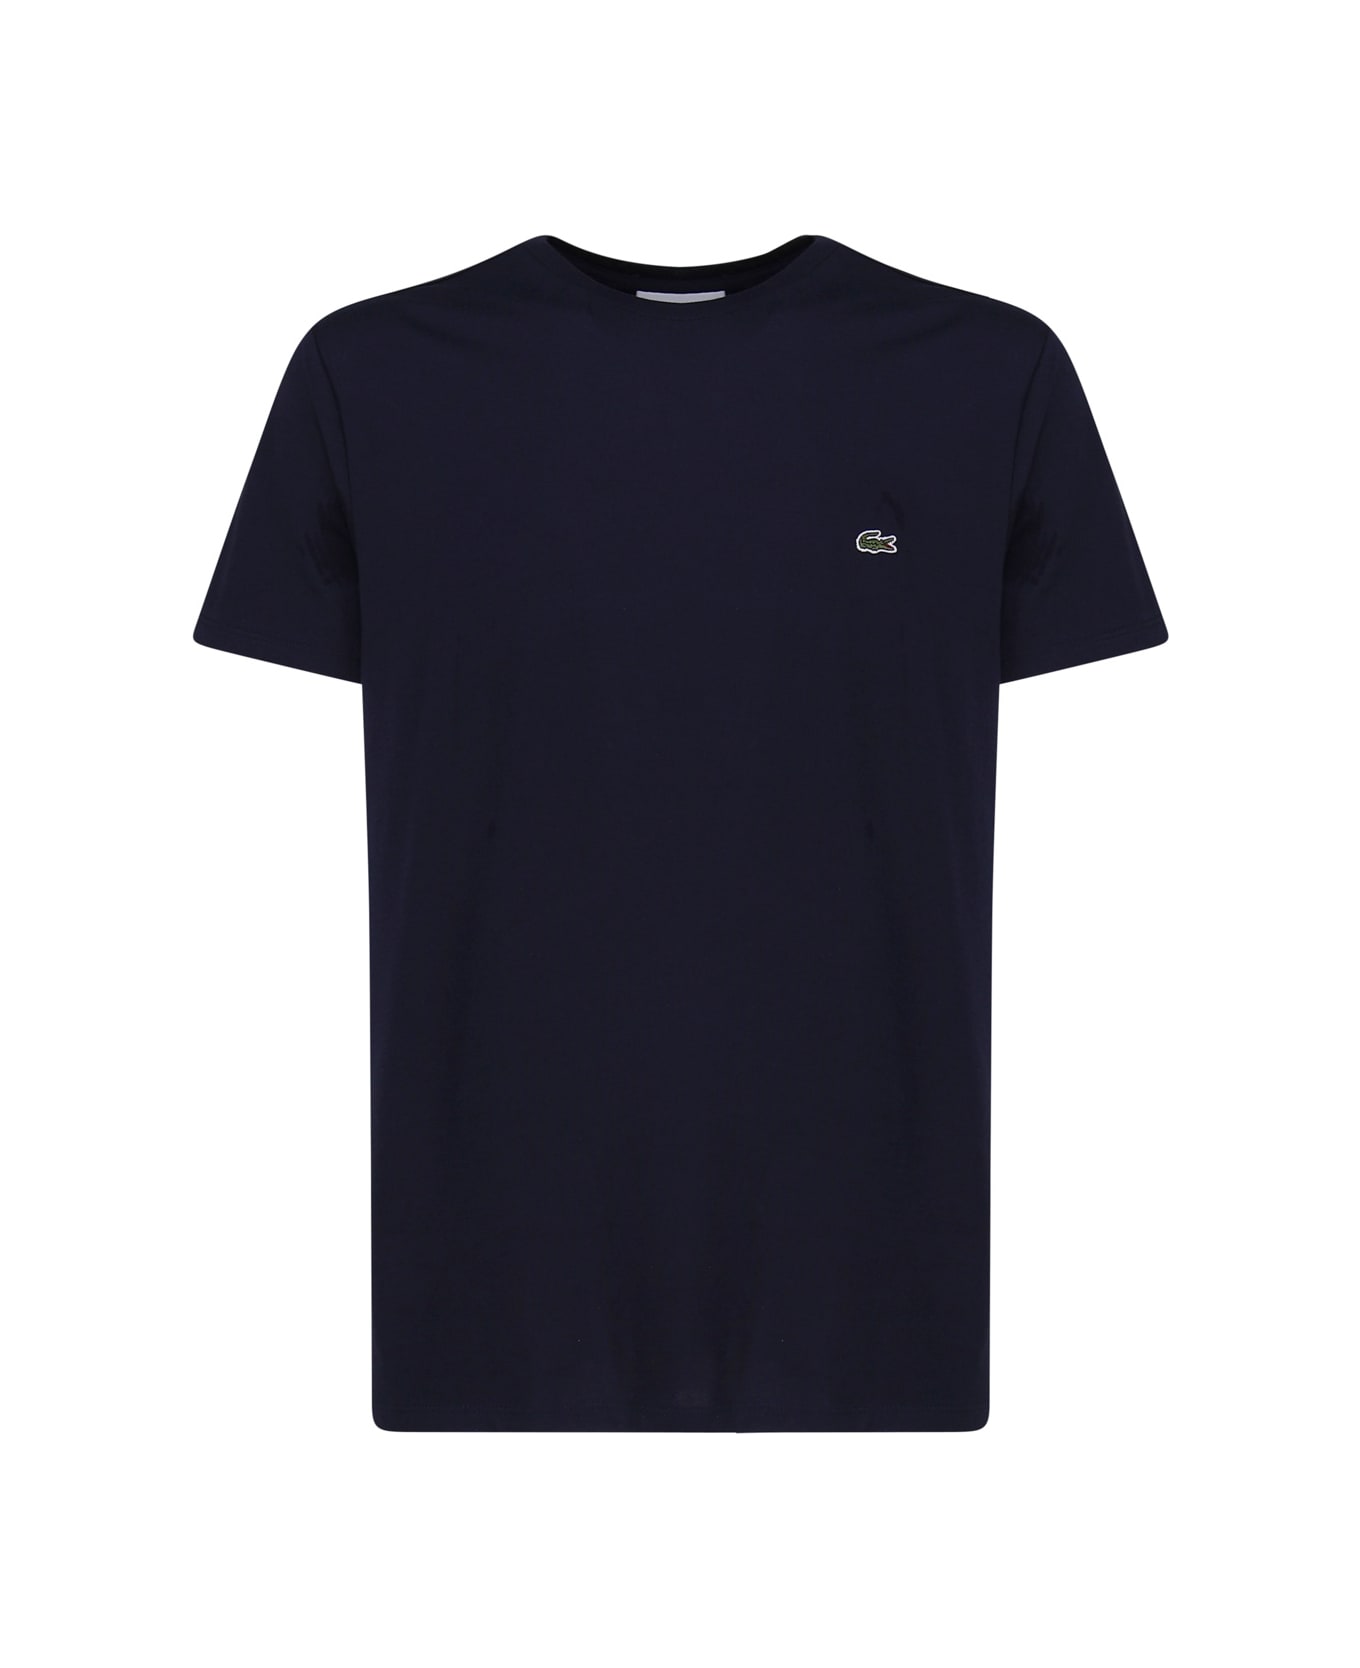 Lacoste Navy Blue T-shirt In Cotton Jersey Lacoste シャツ